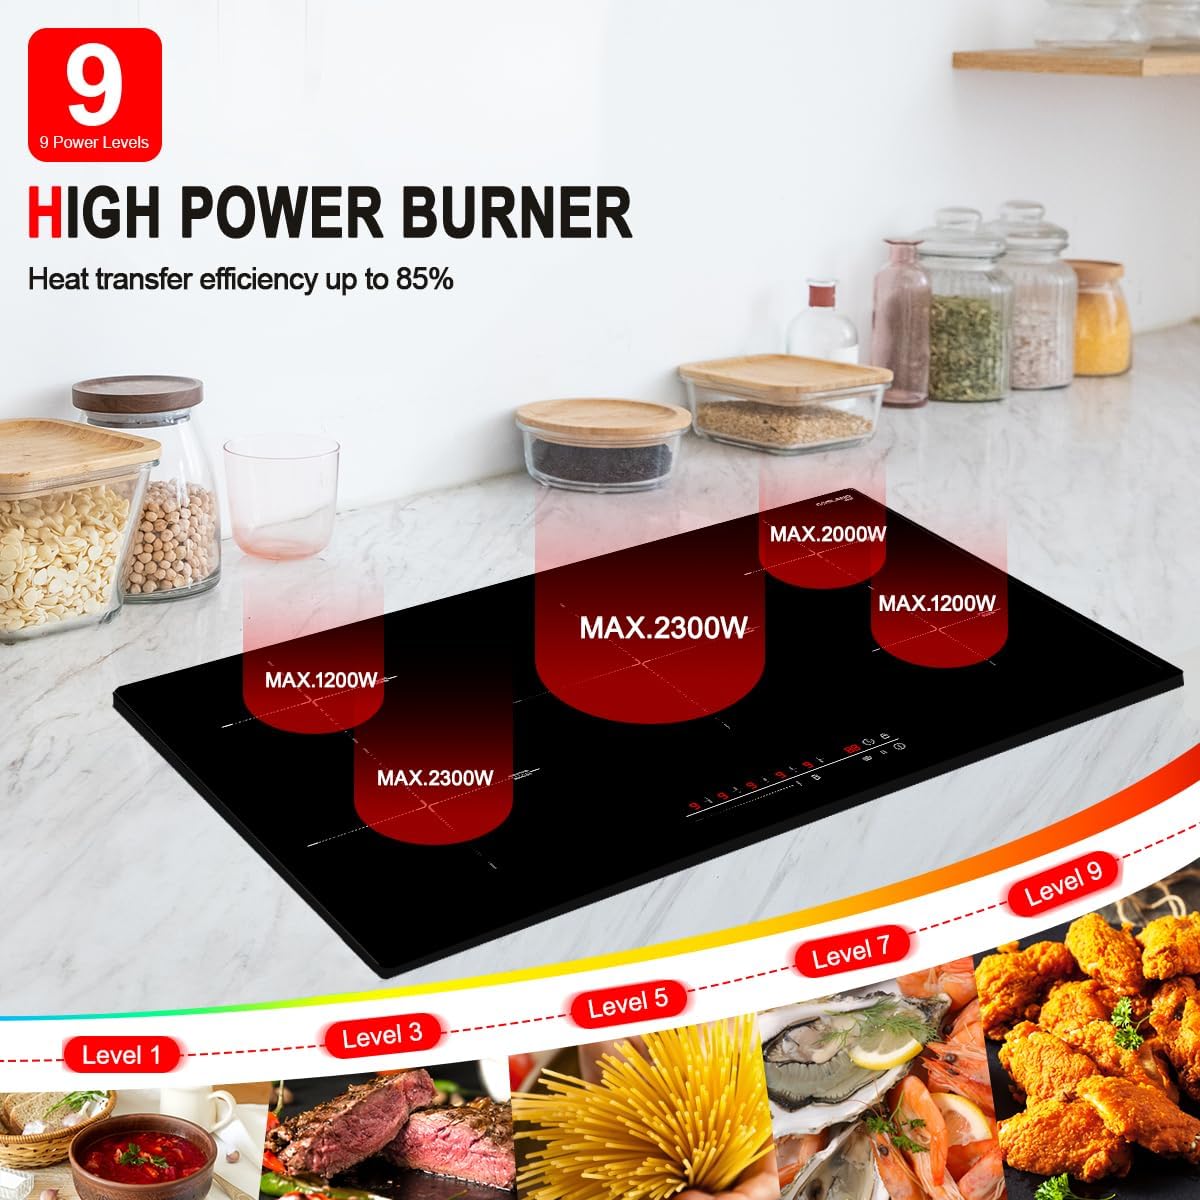 36 Inch Induction Cooktop, GASLAND Chef Electric Cooktop with 5 Burners, 9 Power Levels, Child Safety Lock, 1-99 Minutes Timer, Slight Touch Control, 240V (36 inch-slide control)